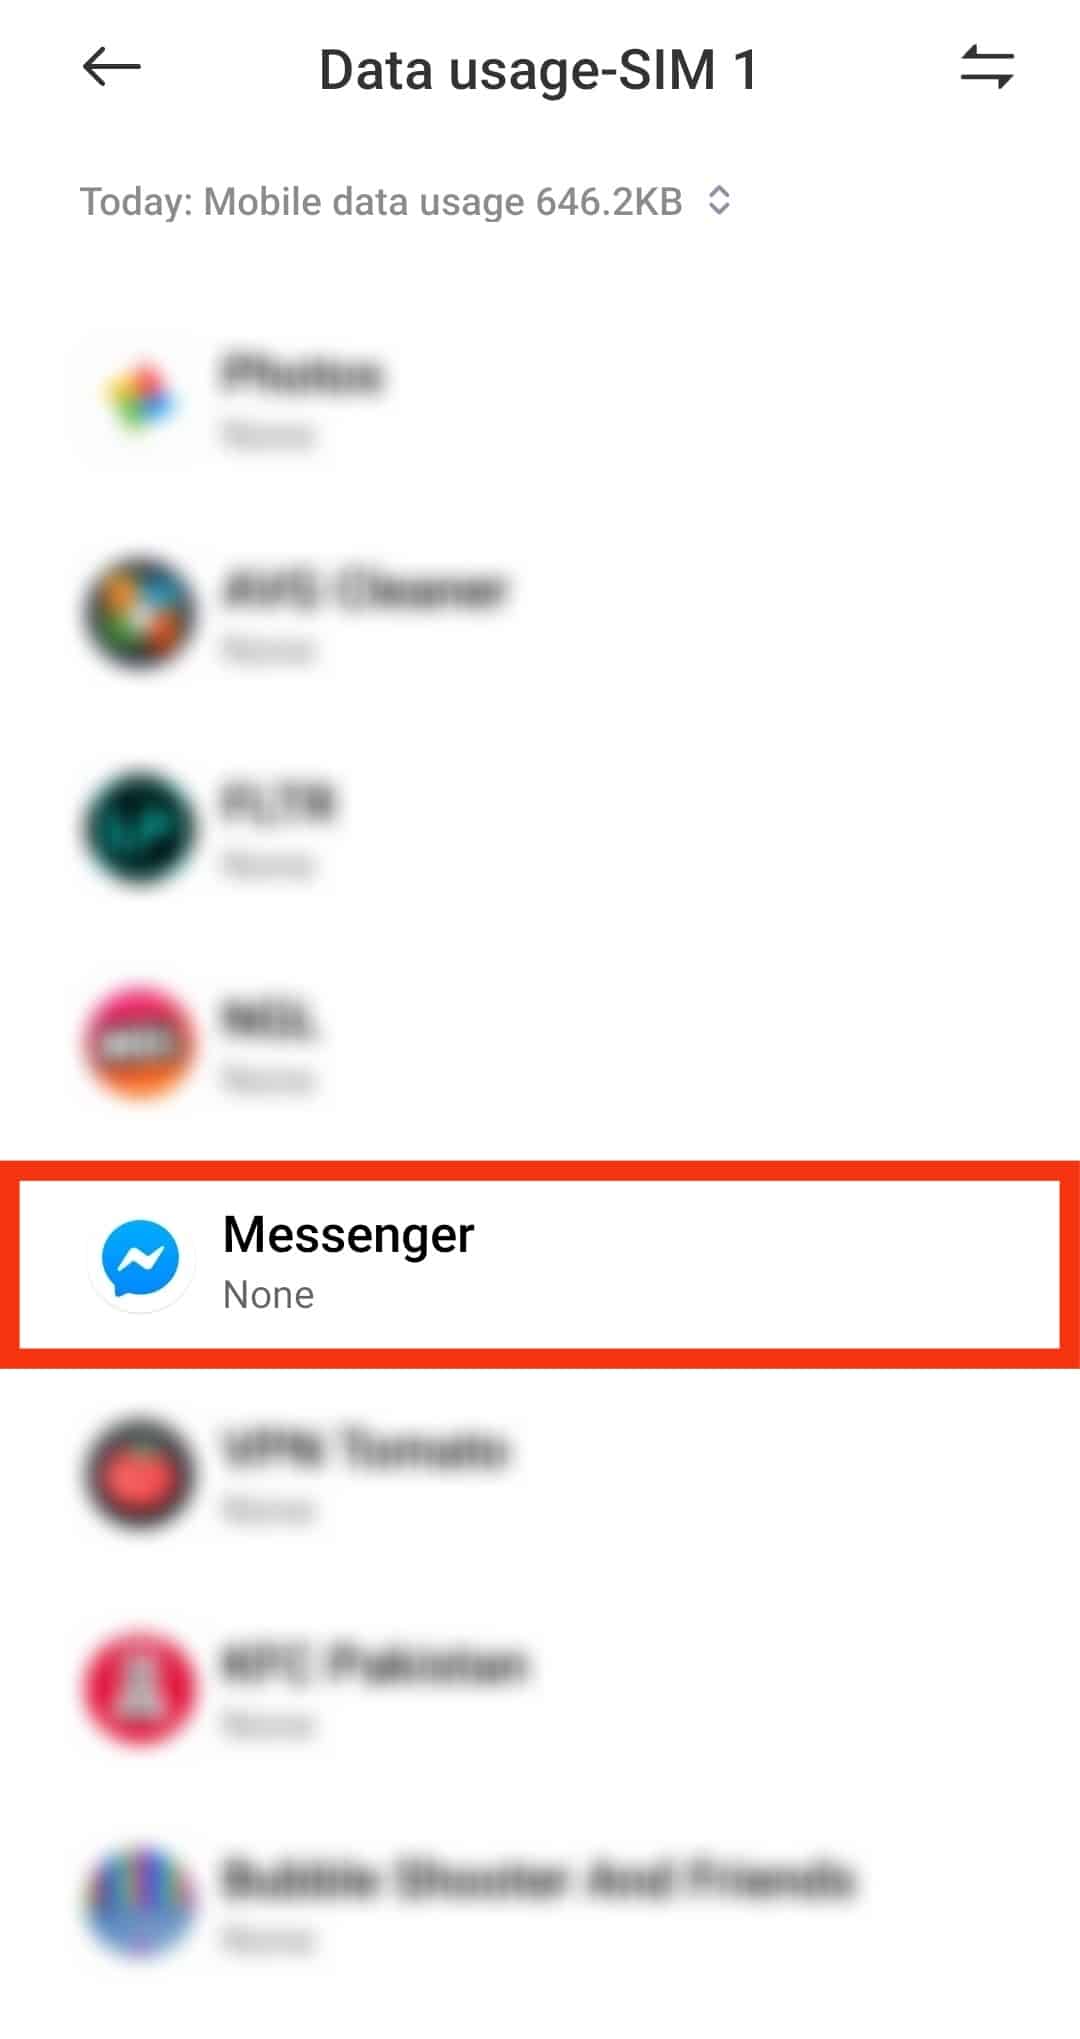 Scroll Down To Messenger